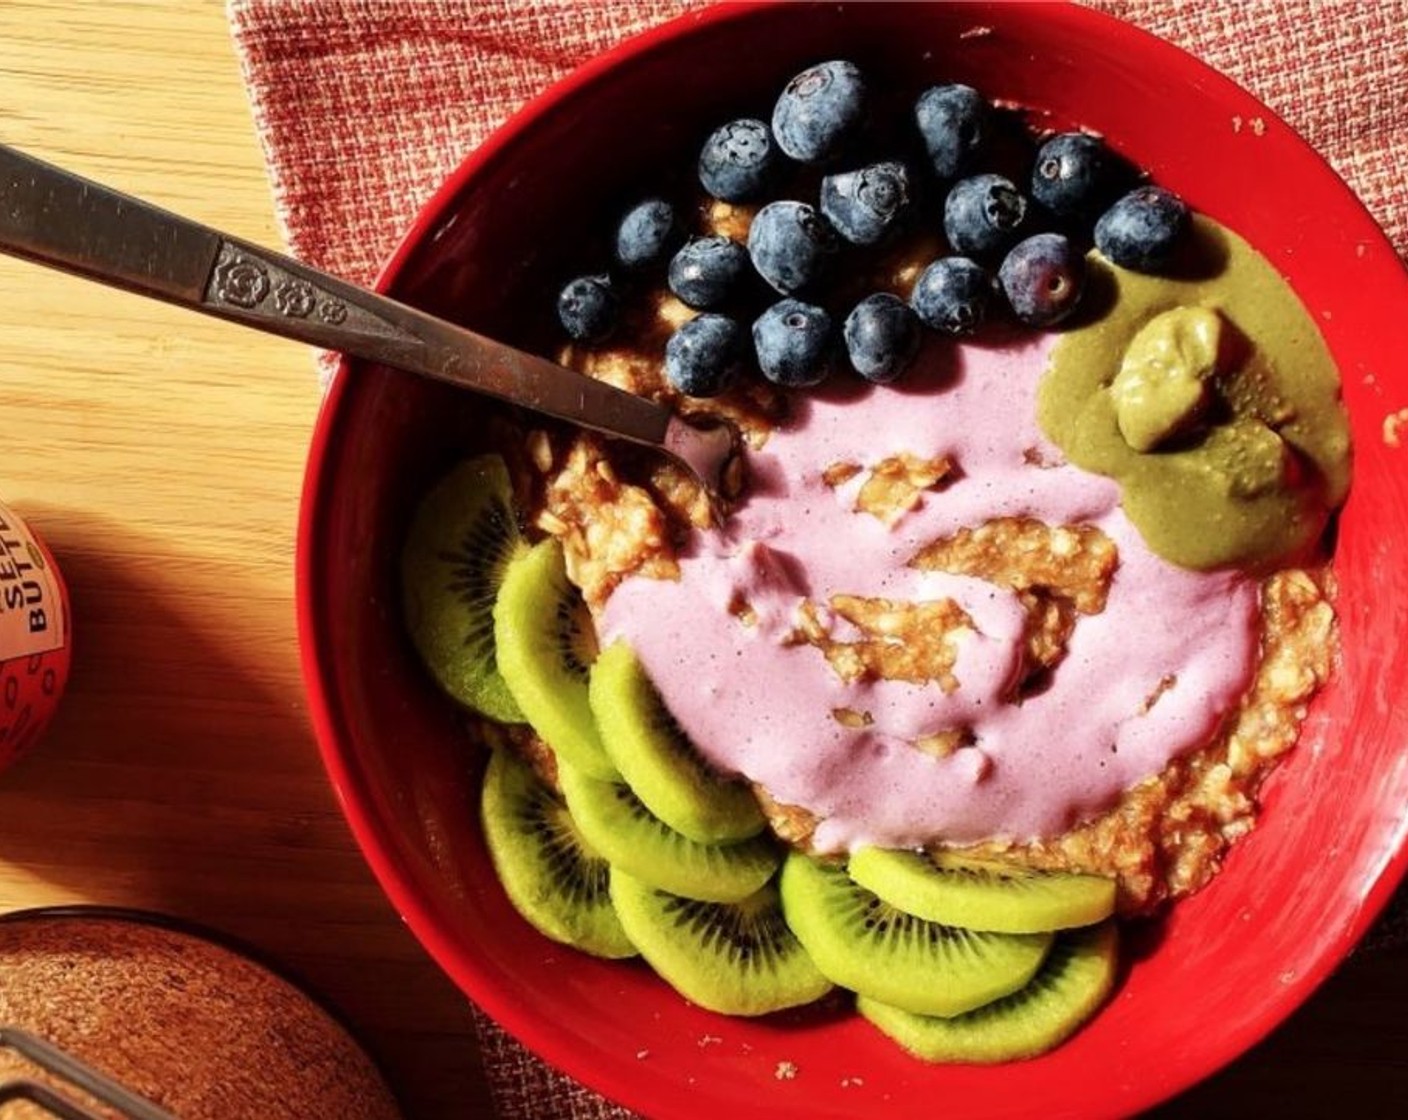 step 5 Top your oatmeal with Blueberry Kefir (2 Tbsp), Pumpkin Seed Butter (1 tsp), Fresh Blueberry (1/4 cup) and Kiwifruit (1/2). Serve it up!